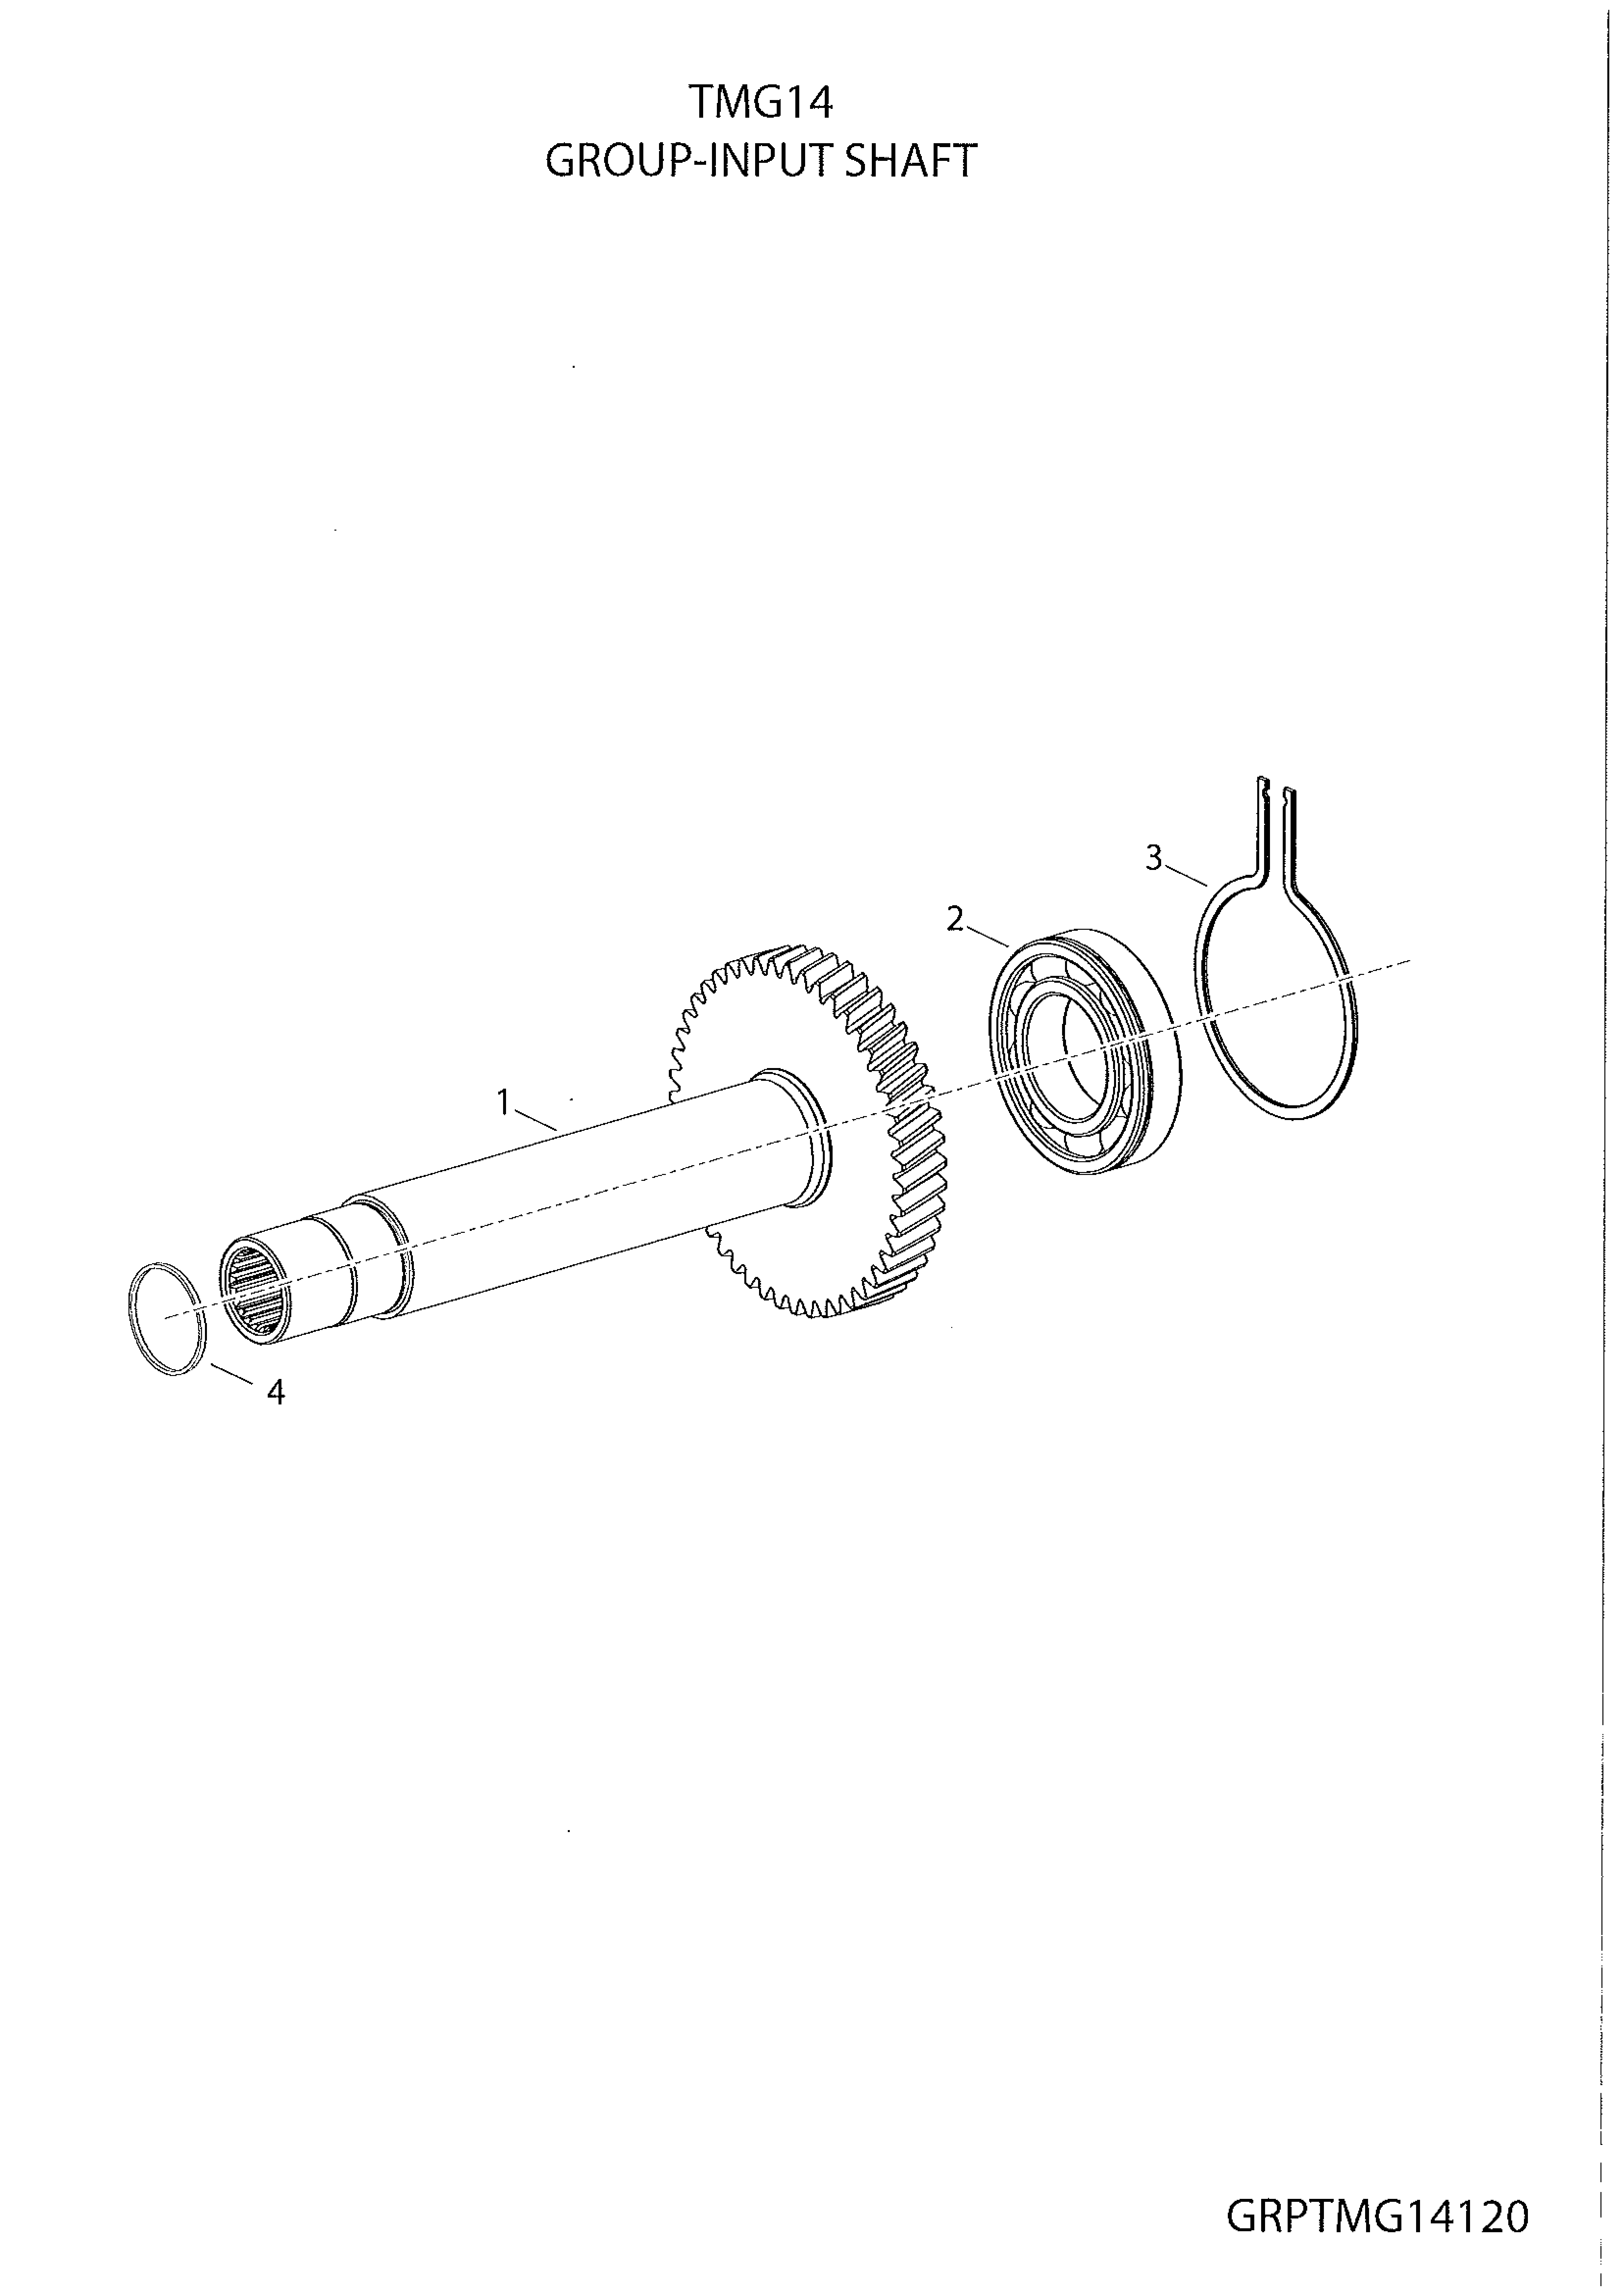 drawing for VALLEE CK234215 - BEARING (figure 4)